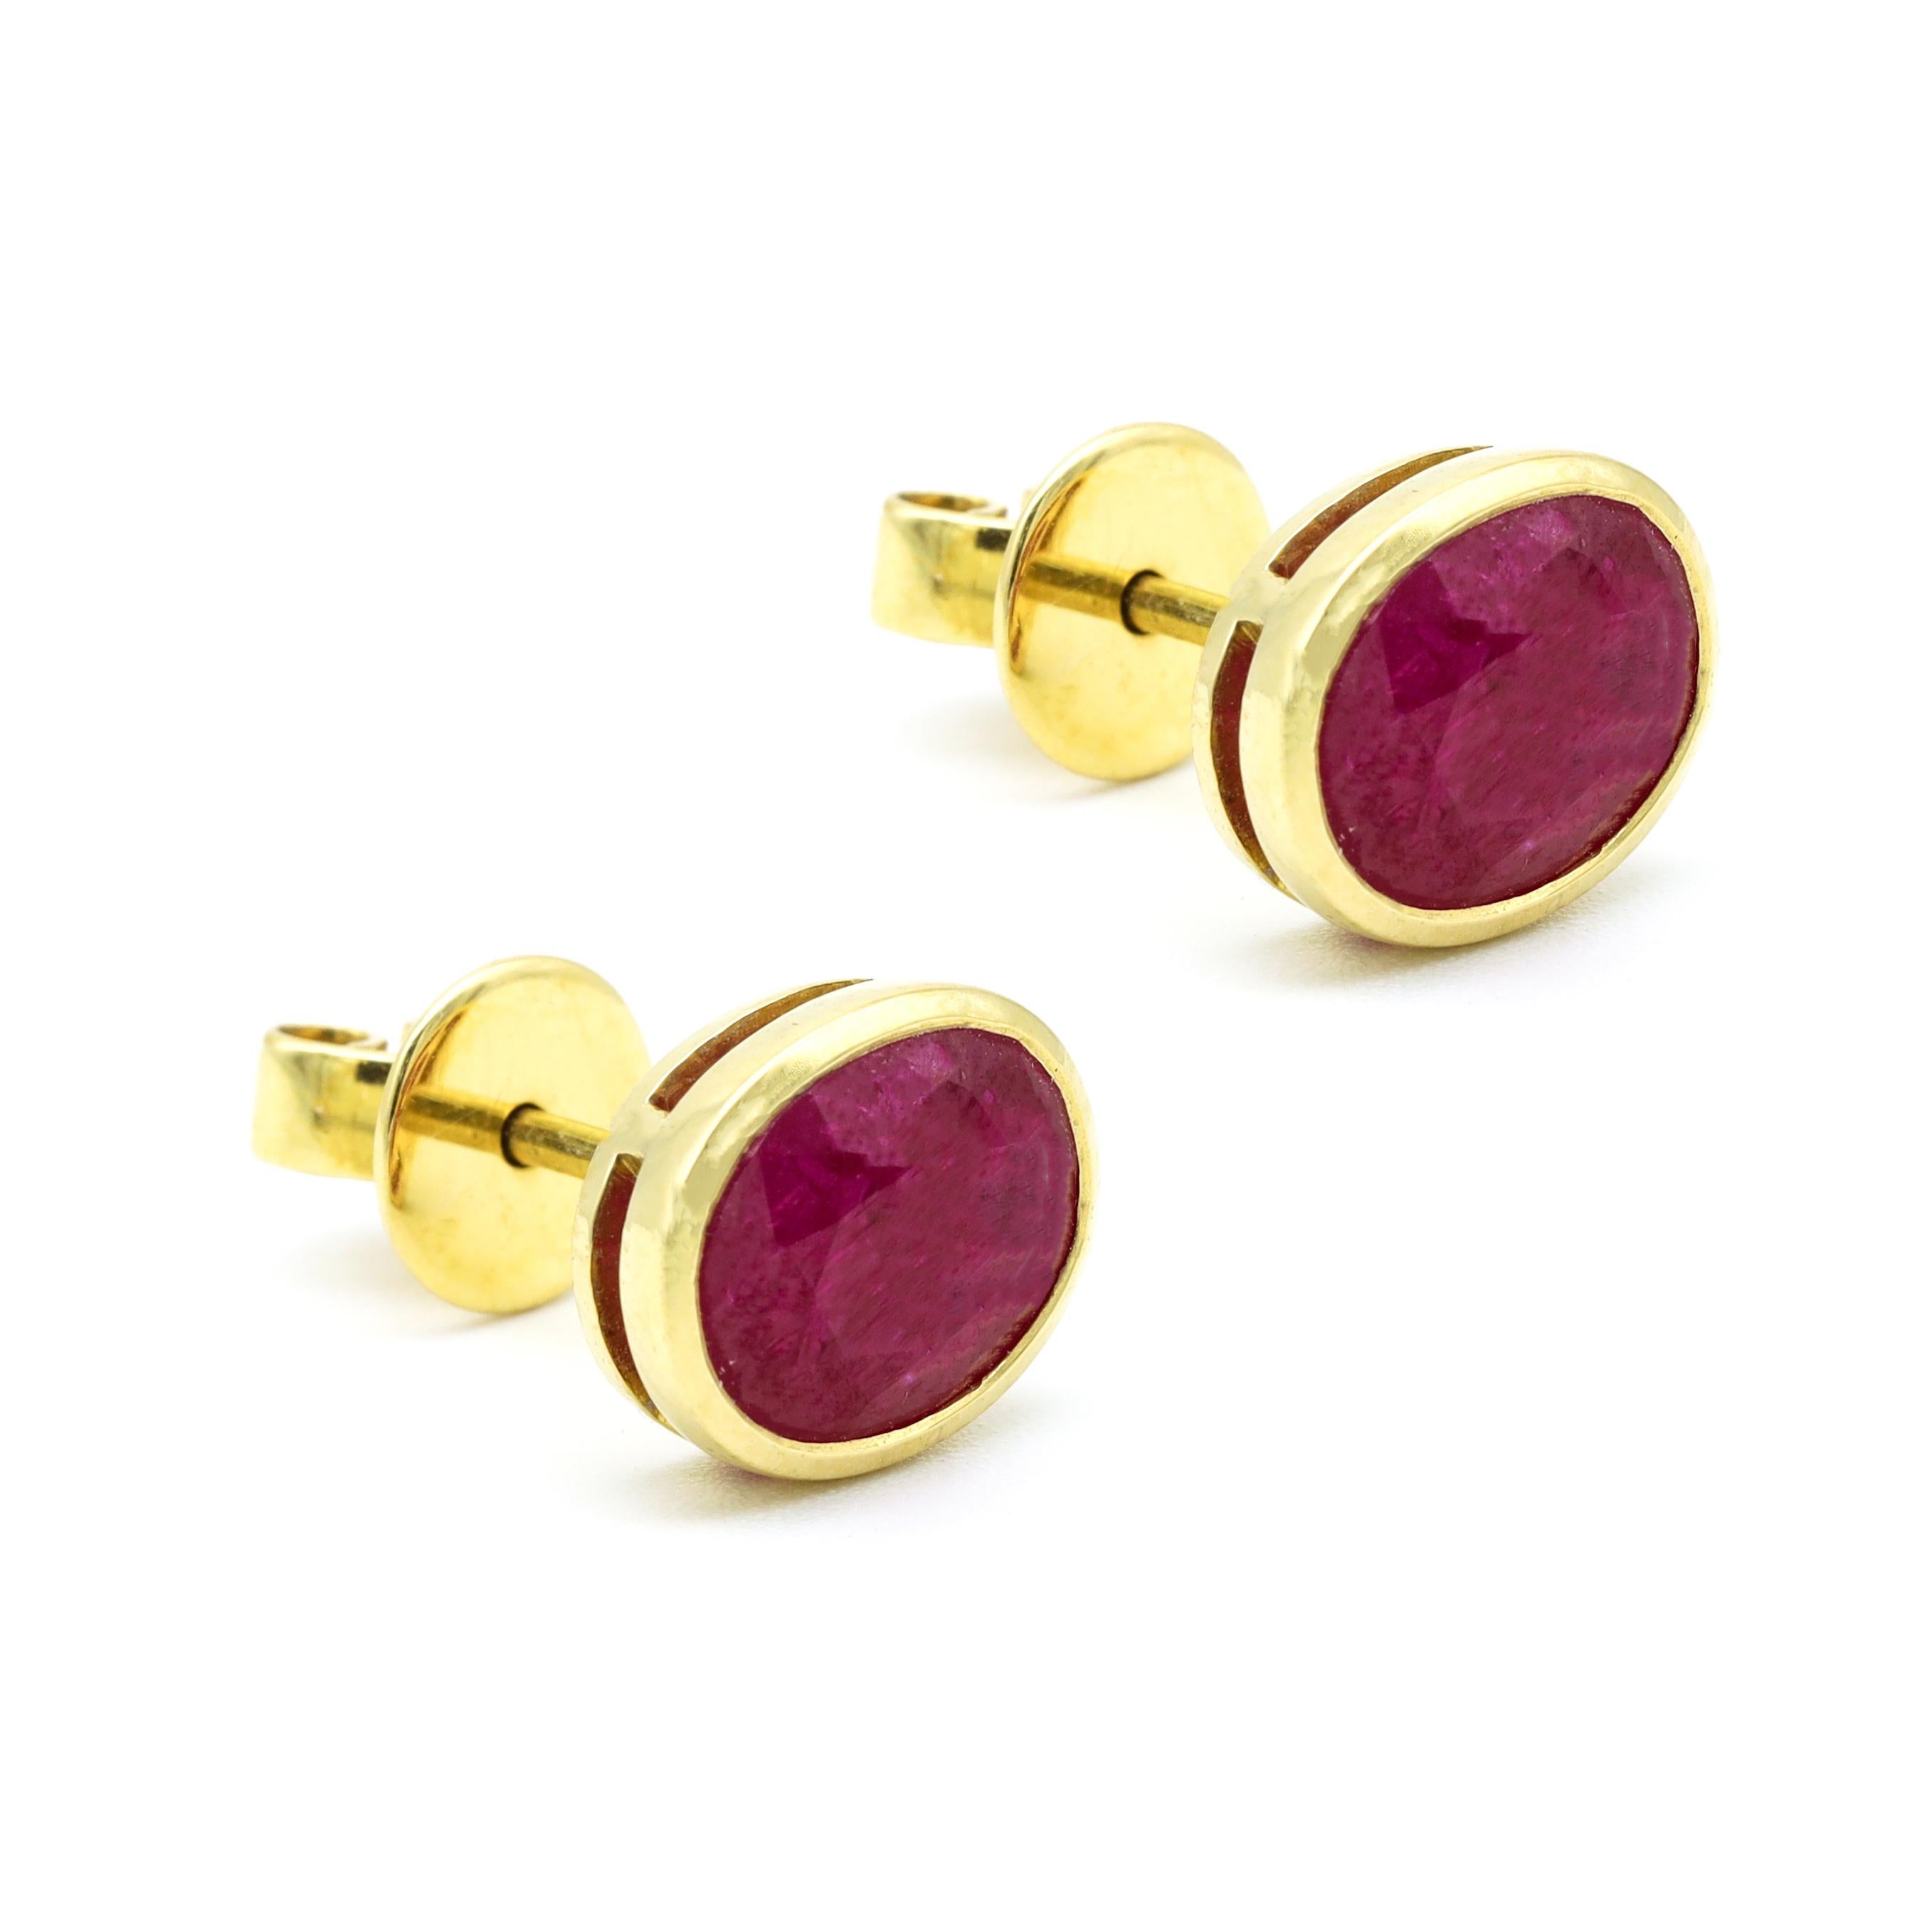 18 Karat Yellow Gold 4.76 Carat Oval-Cut Ruby Stud Earrings

This cardinal classic ruby oval pair is exquisite. It’s a simple perfectly matched ruby oval stud enclosed in yellow gold in the evenly spread closed setting with the side framework